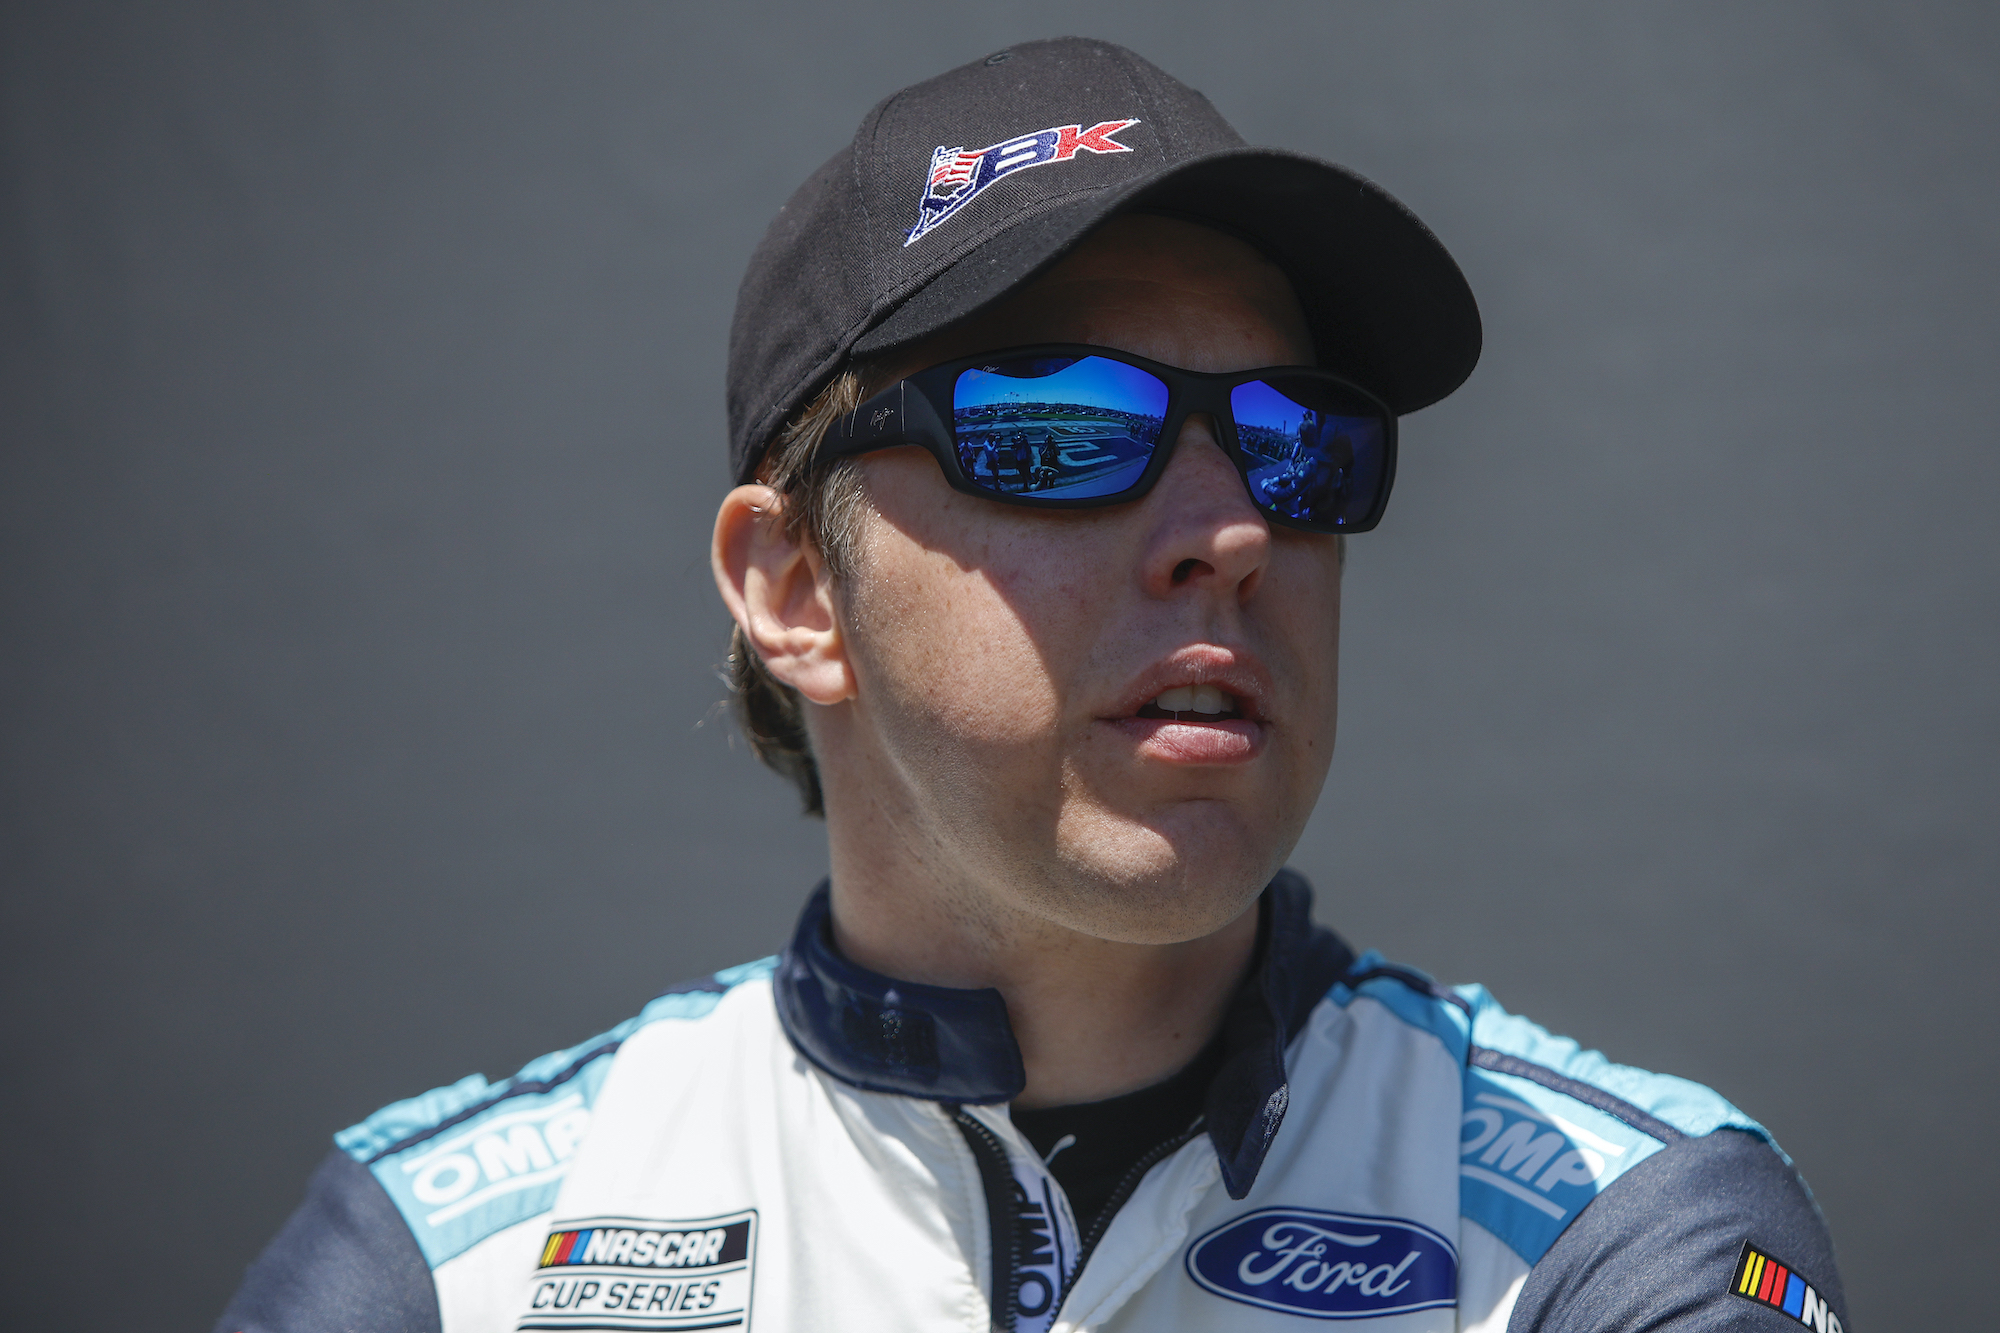 Brad Keselowski and RFK Racing Tested NASCAR’s Boundaries on the Next Gen Car and Will Now Suffer the Consequences With a Major Penalty